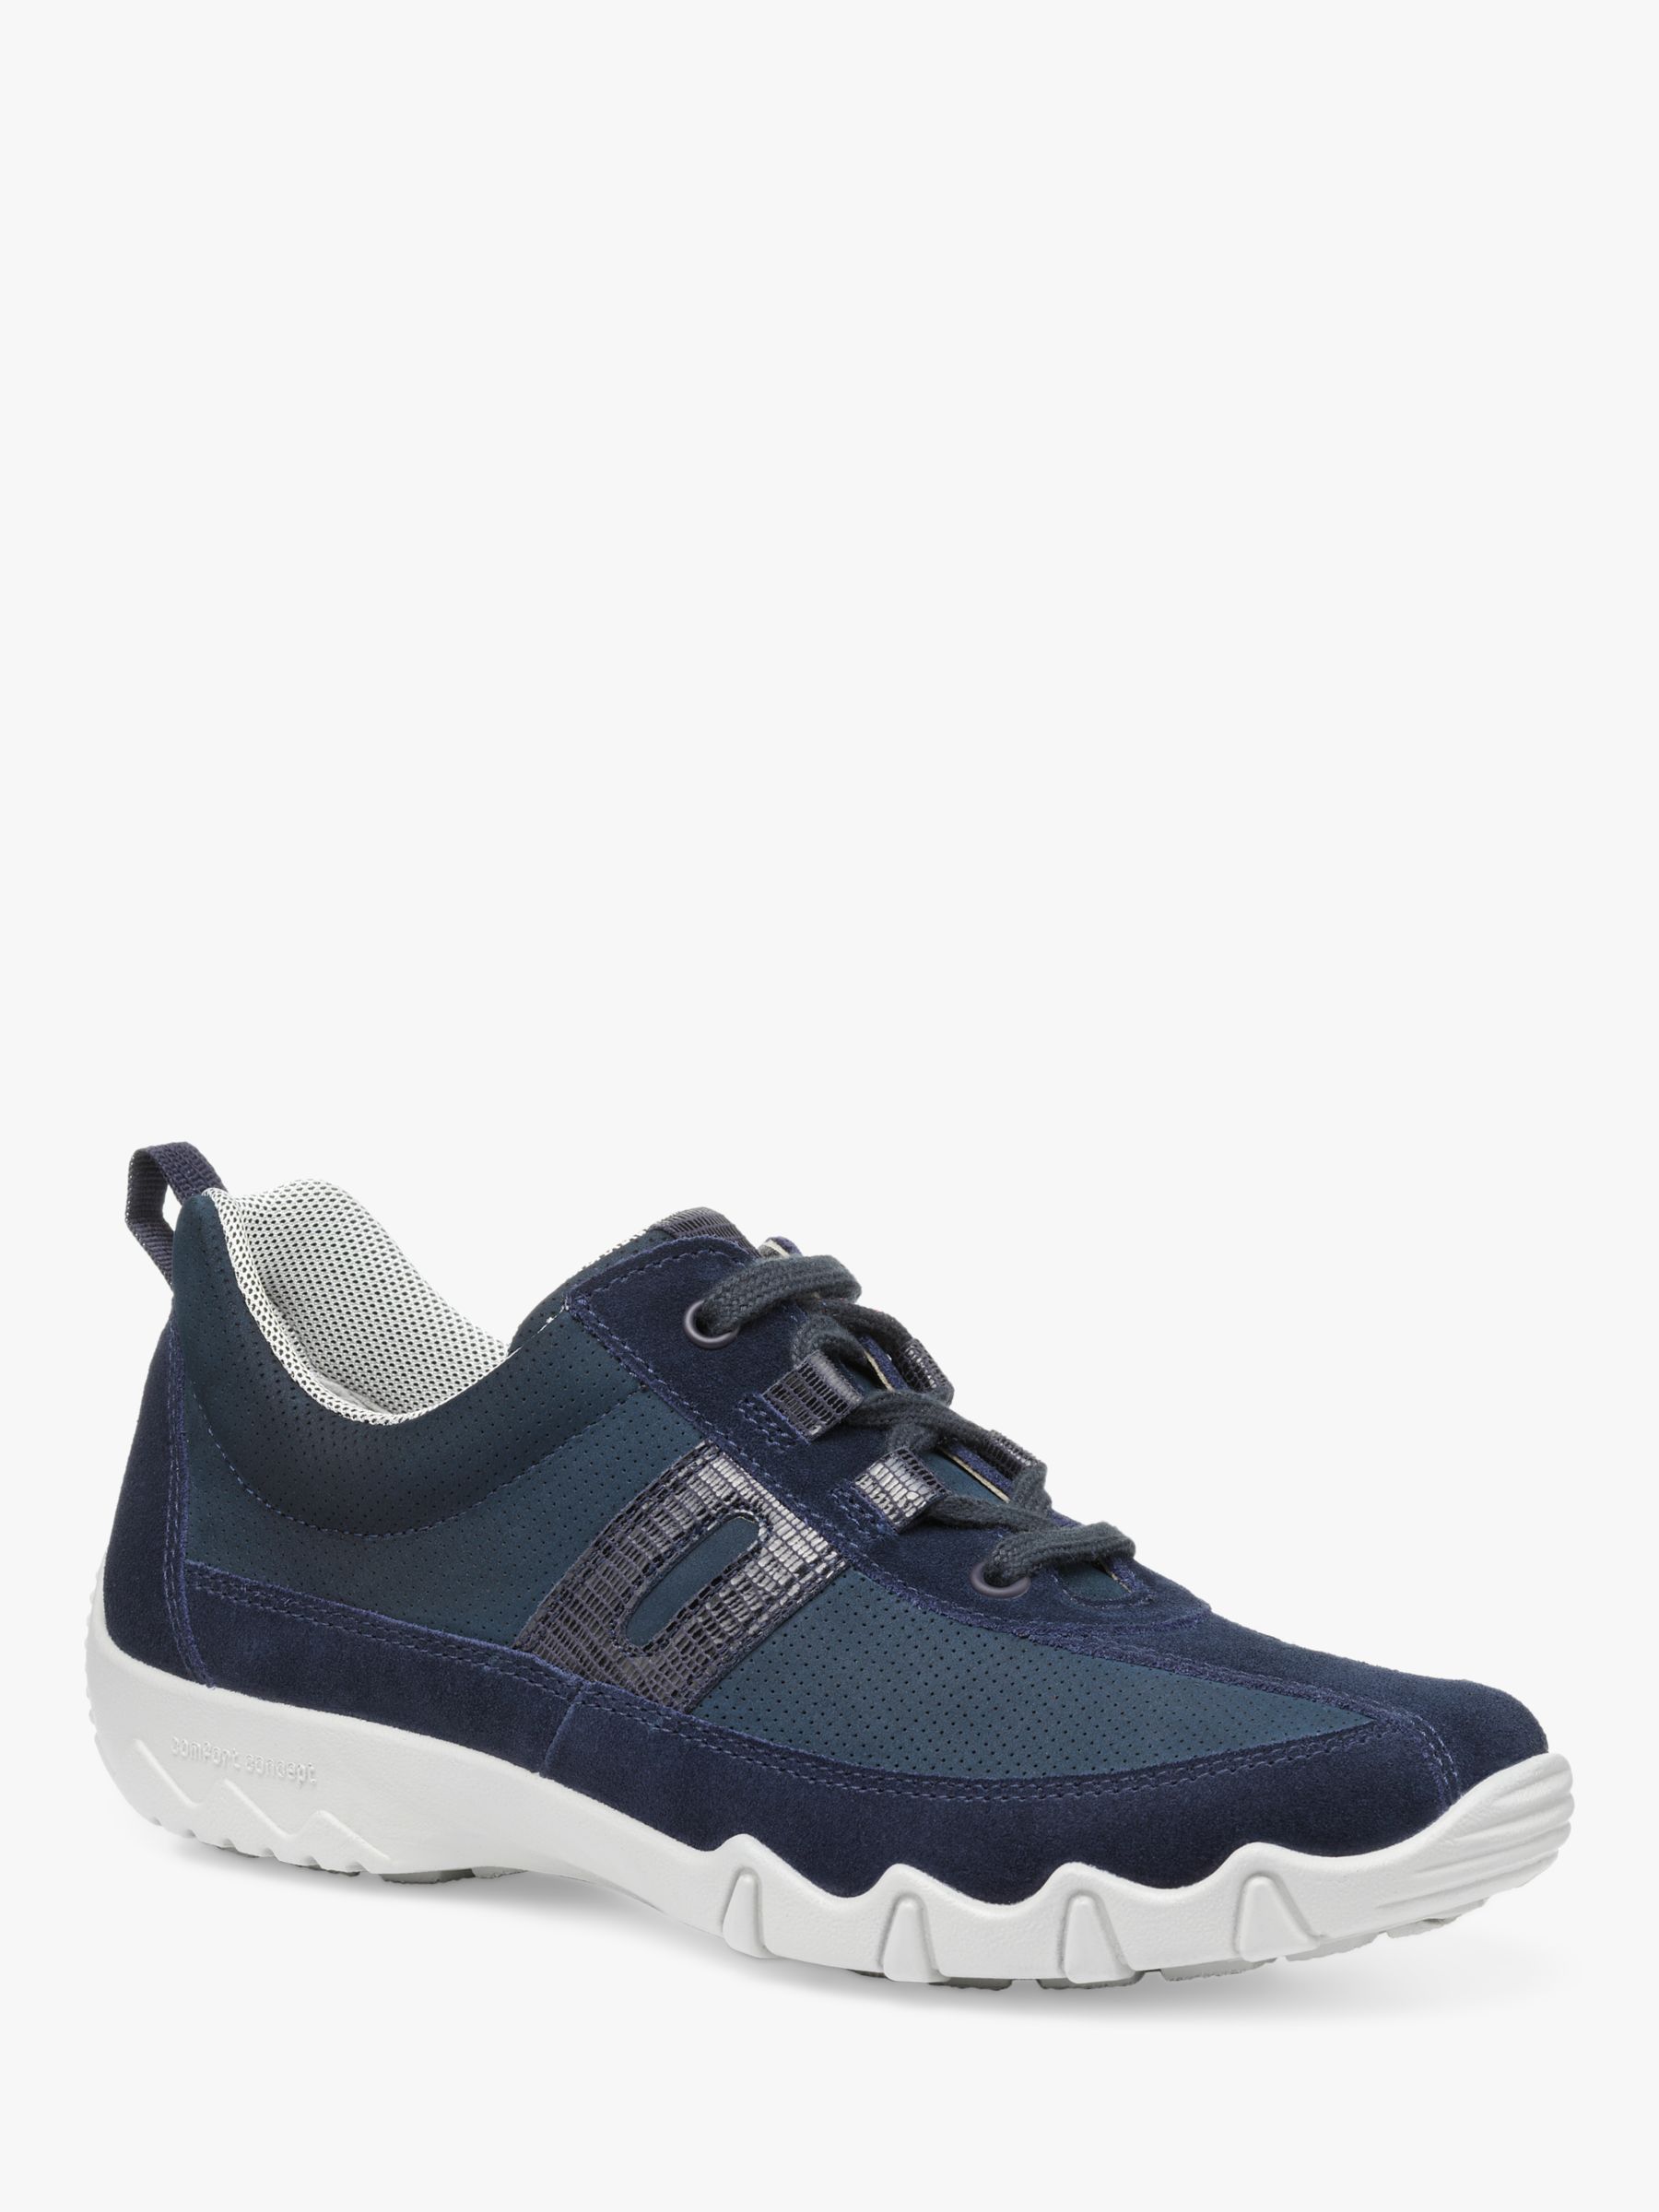 Buy Hotter Leanne II Suede and Nubuck Trainers, Navy Online at johnlewis.com